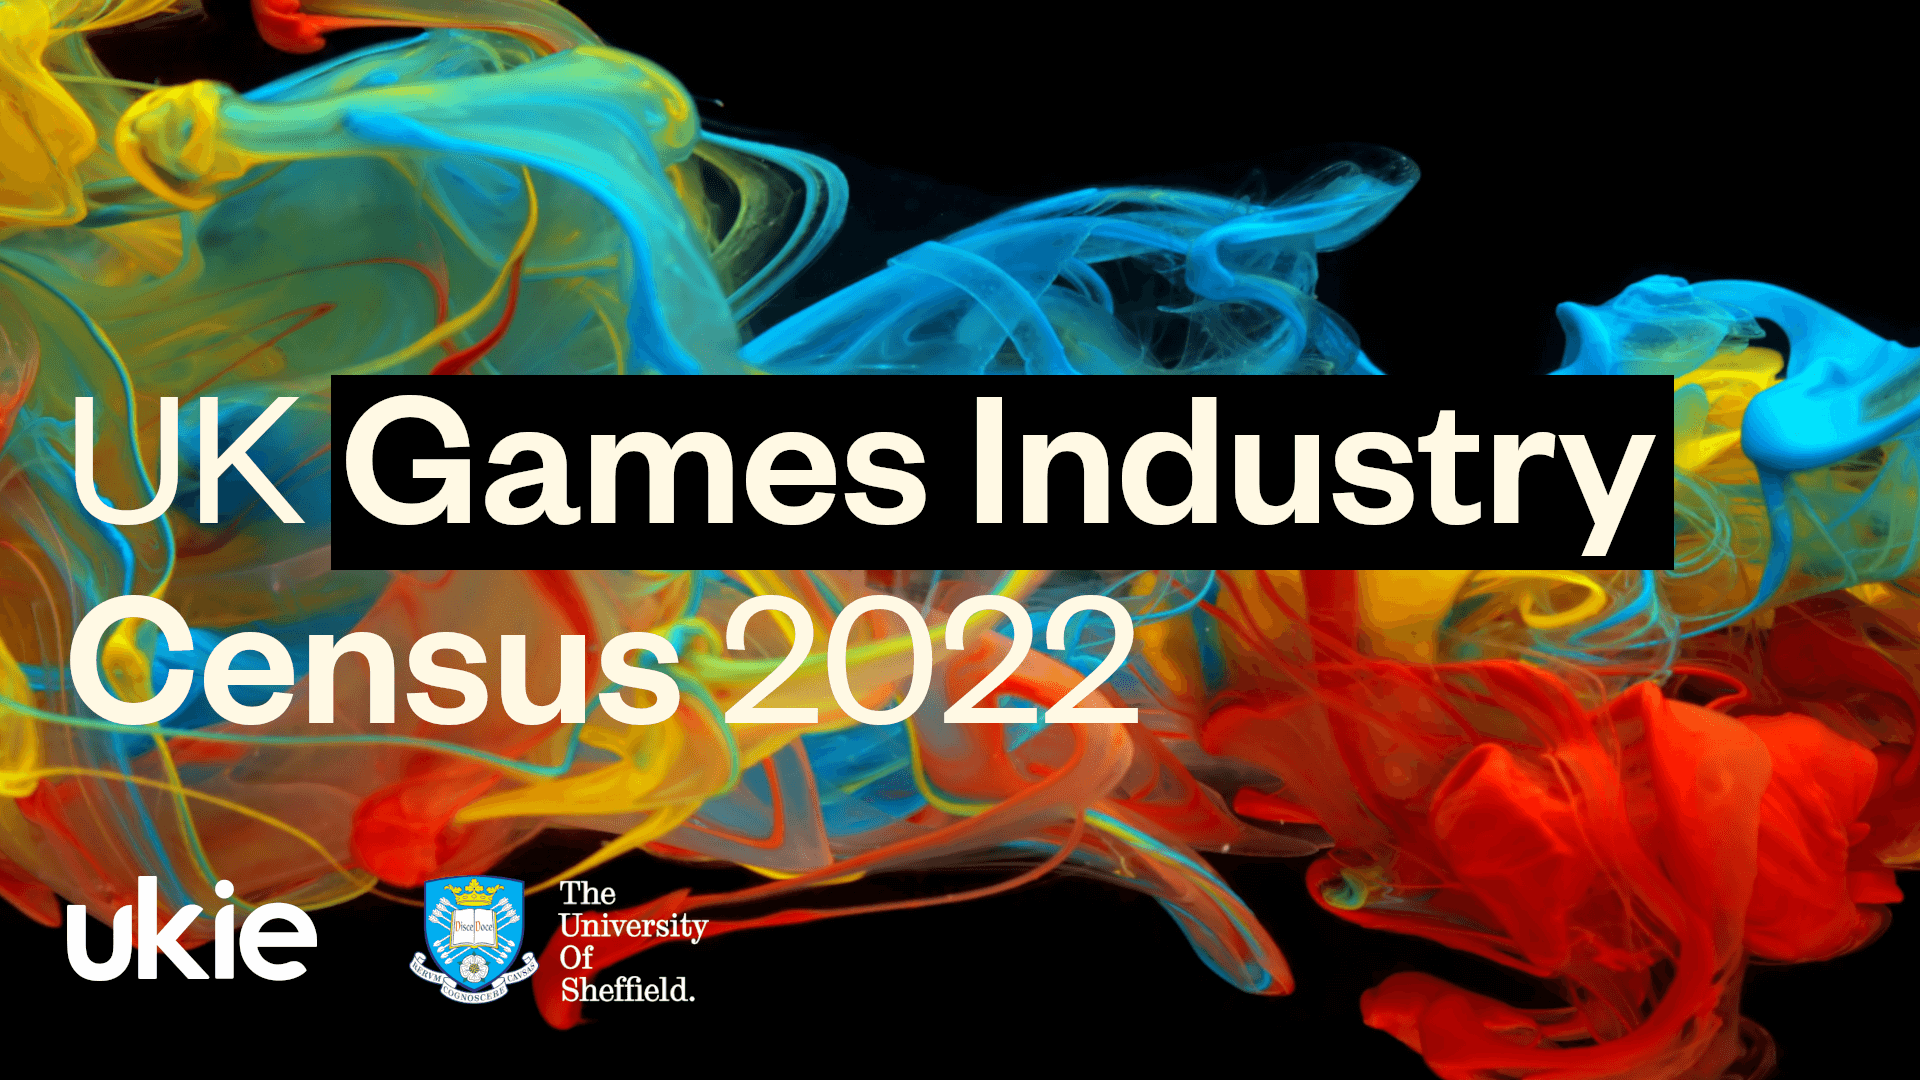 <img src="UK Games Industry Cenus Report_Mar 2022 Cover.png" alt="Cover image for the UK Games Industry Census 2022 Report with title, multi-coloured smoke and relevant logos of organisations involved in project such as Ukie and University of Sheffield">